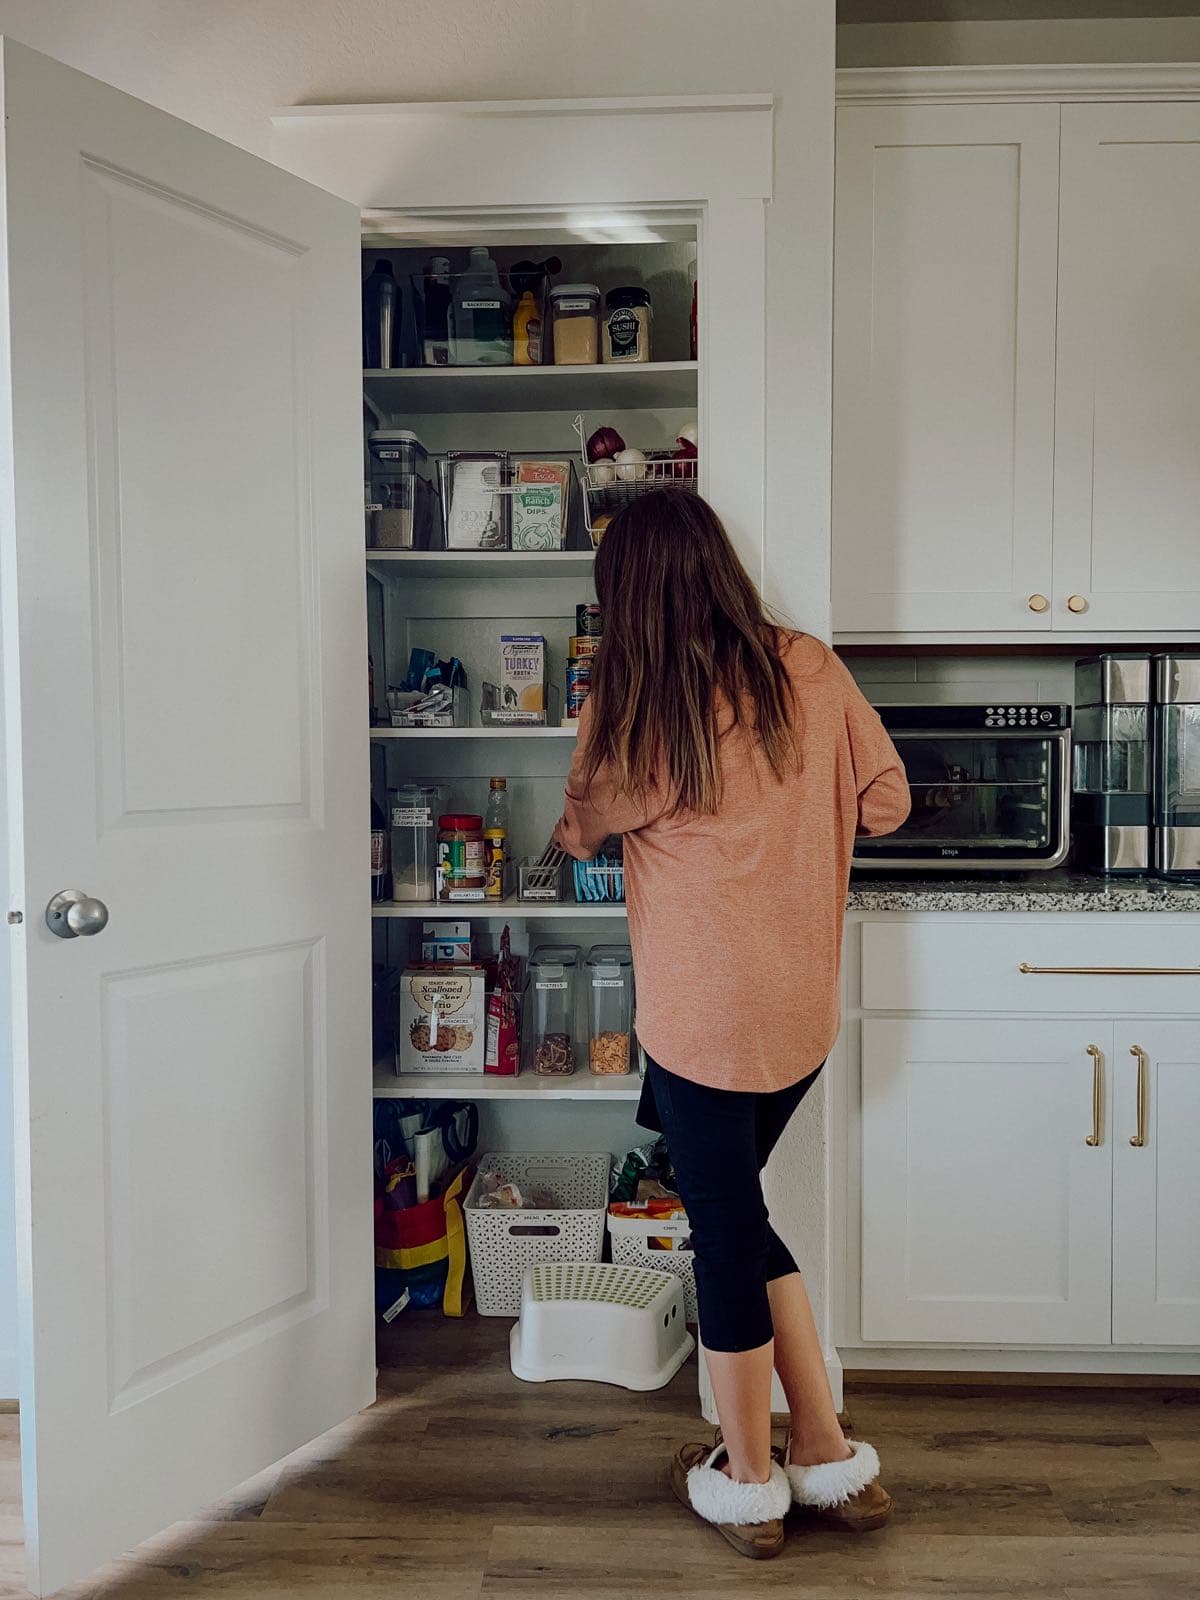 Simple Pantry Cabinet Storage Solutions to Organize Your Life